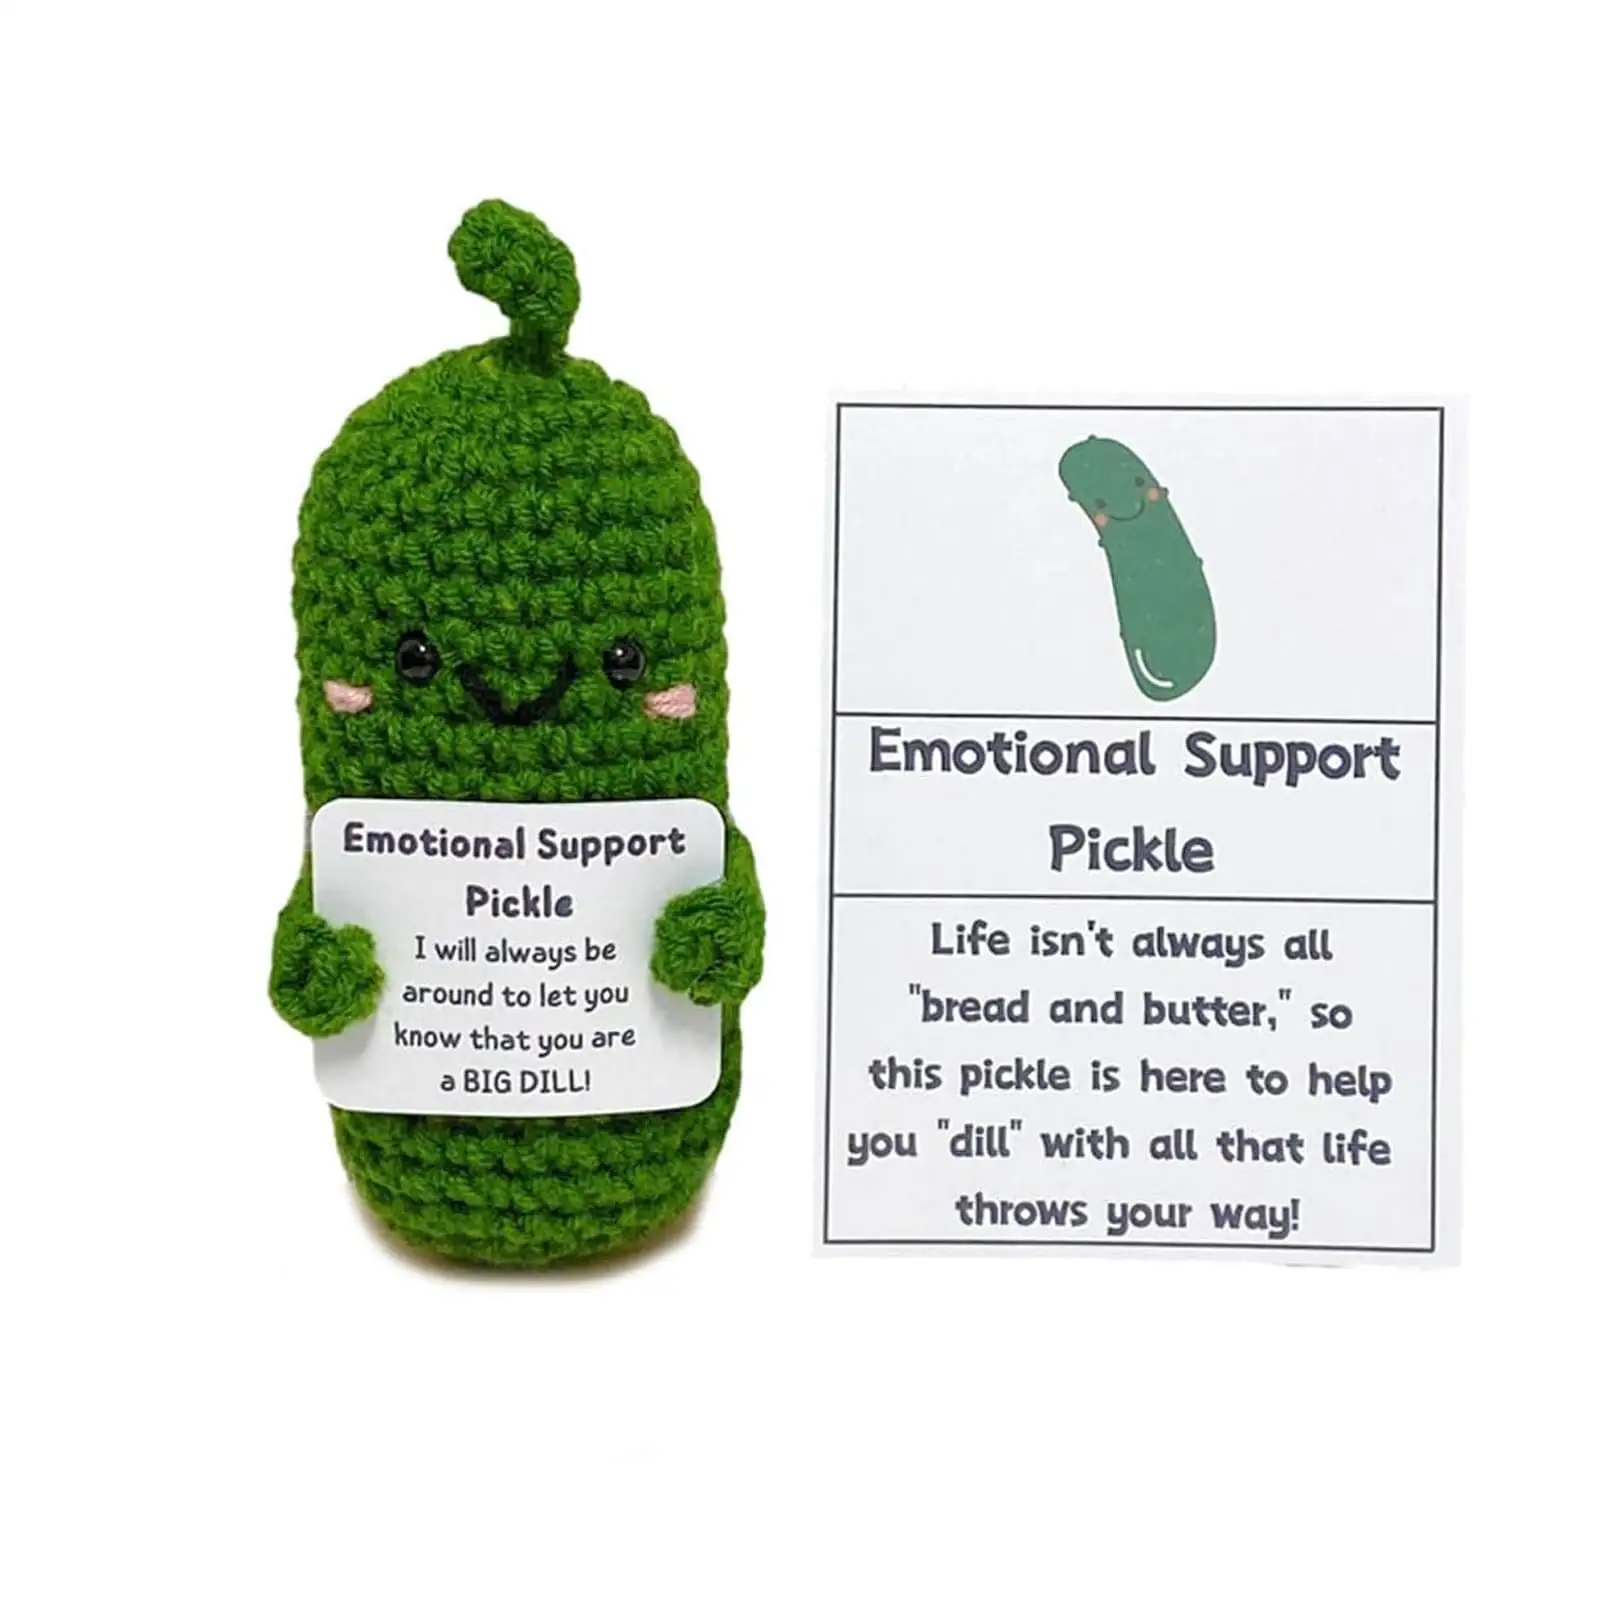 Handmade Emotional Support Pickled Cucumber Gift Handwoven Ornaments Emotional Support Crochet Pickled Cucumber Knitting Doll